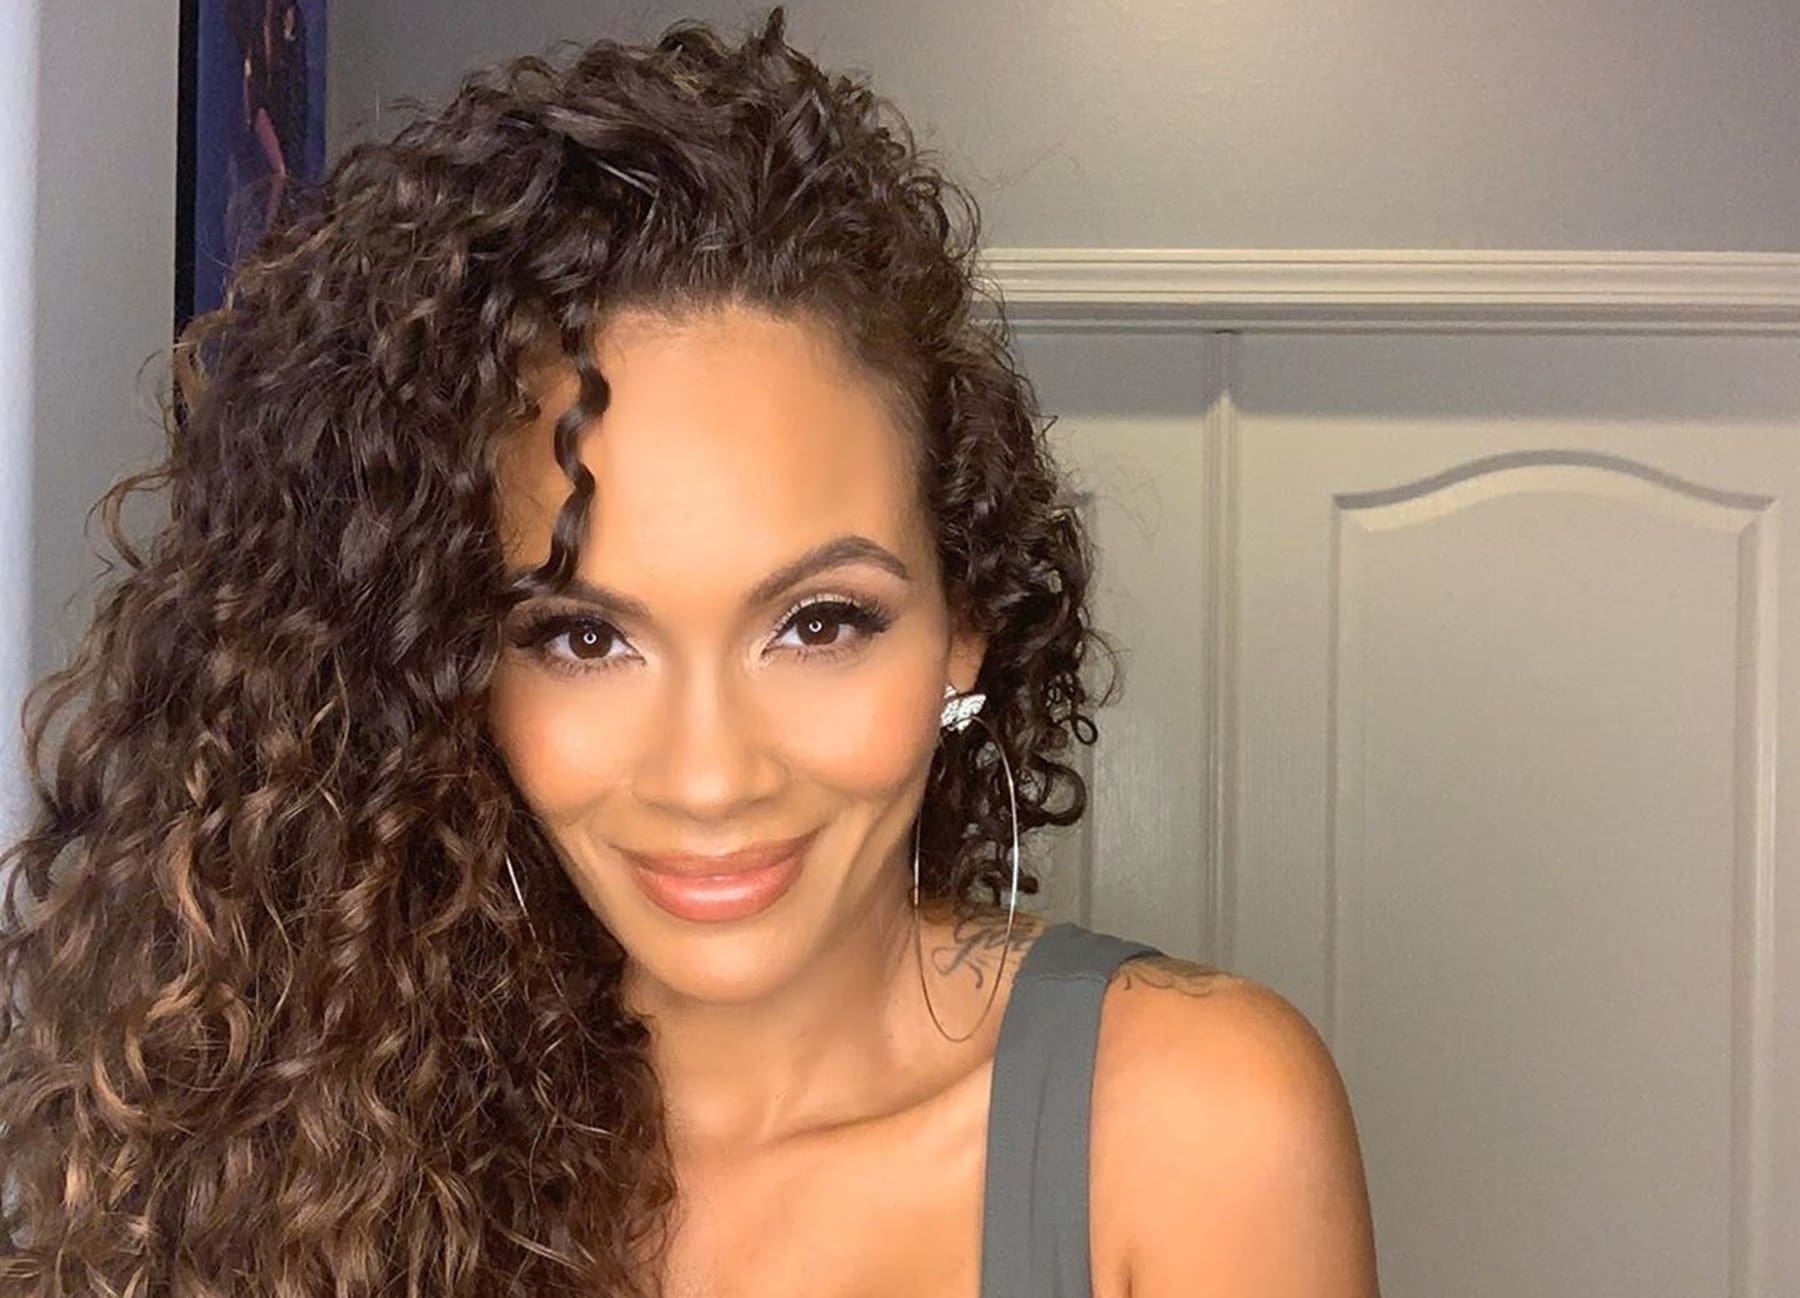 ”evelyn-lozada-gets-emotional-in-video-while-talking-about-ex-carl-crawford-who-is-accused-of-domestic-abuse”